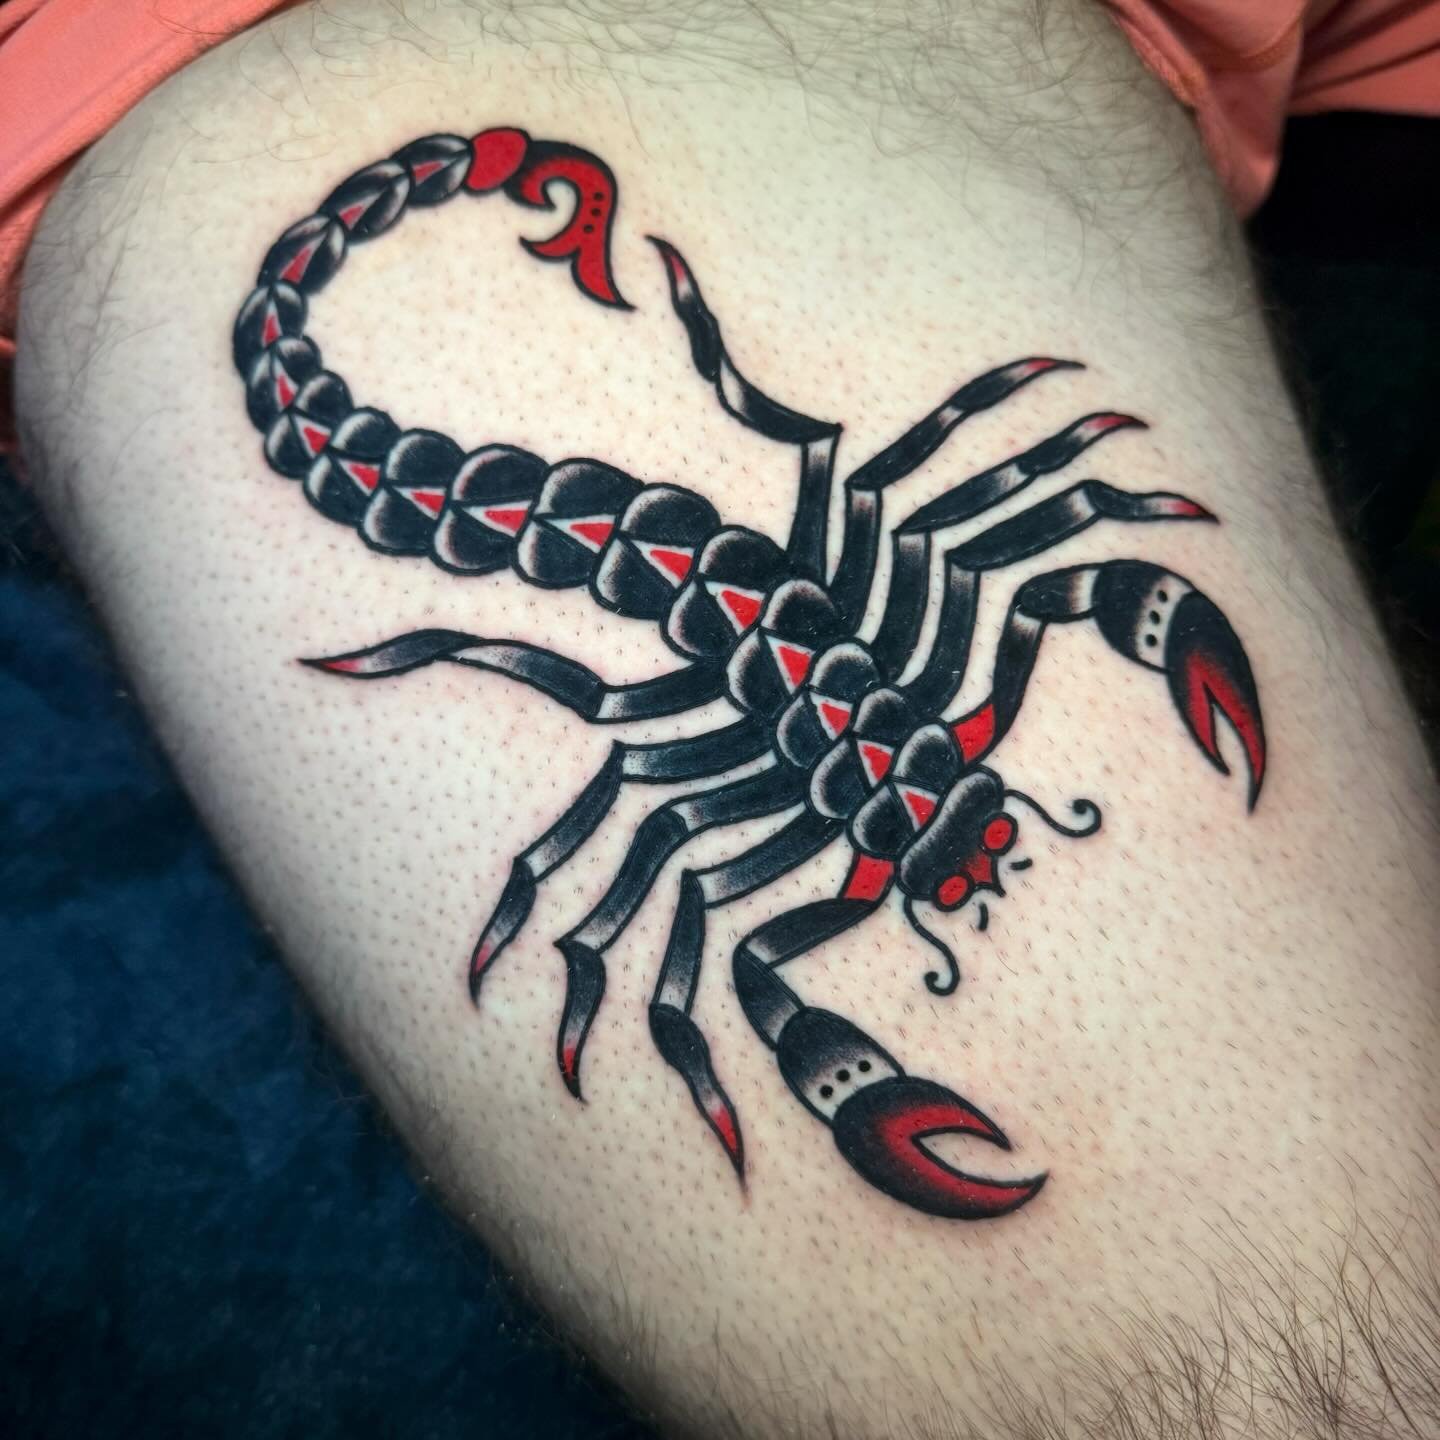 A real big scorpion made @keepsakeokc

Thank you for the trust with this piece Erik! 

Book yours now, Tuesday-Friday, at 11am and 3pm, walk-ins on Saturdays!

#tattooflash #classictattoo #vintagetattoo #traditionaltattooflash #tattoo #tattoos #oklah